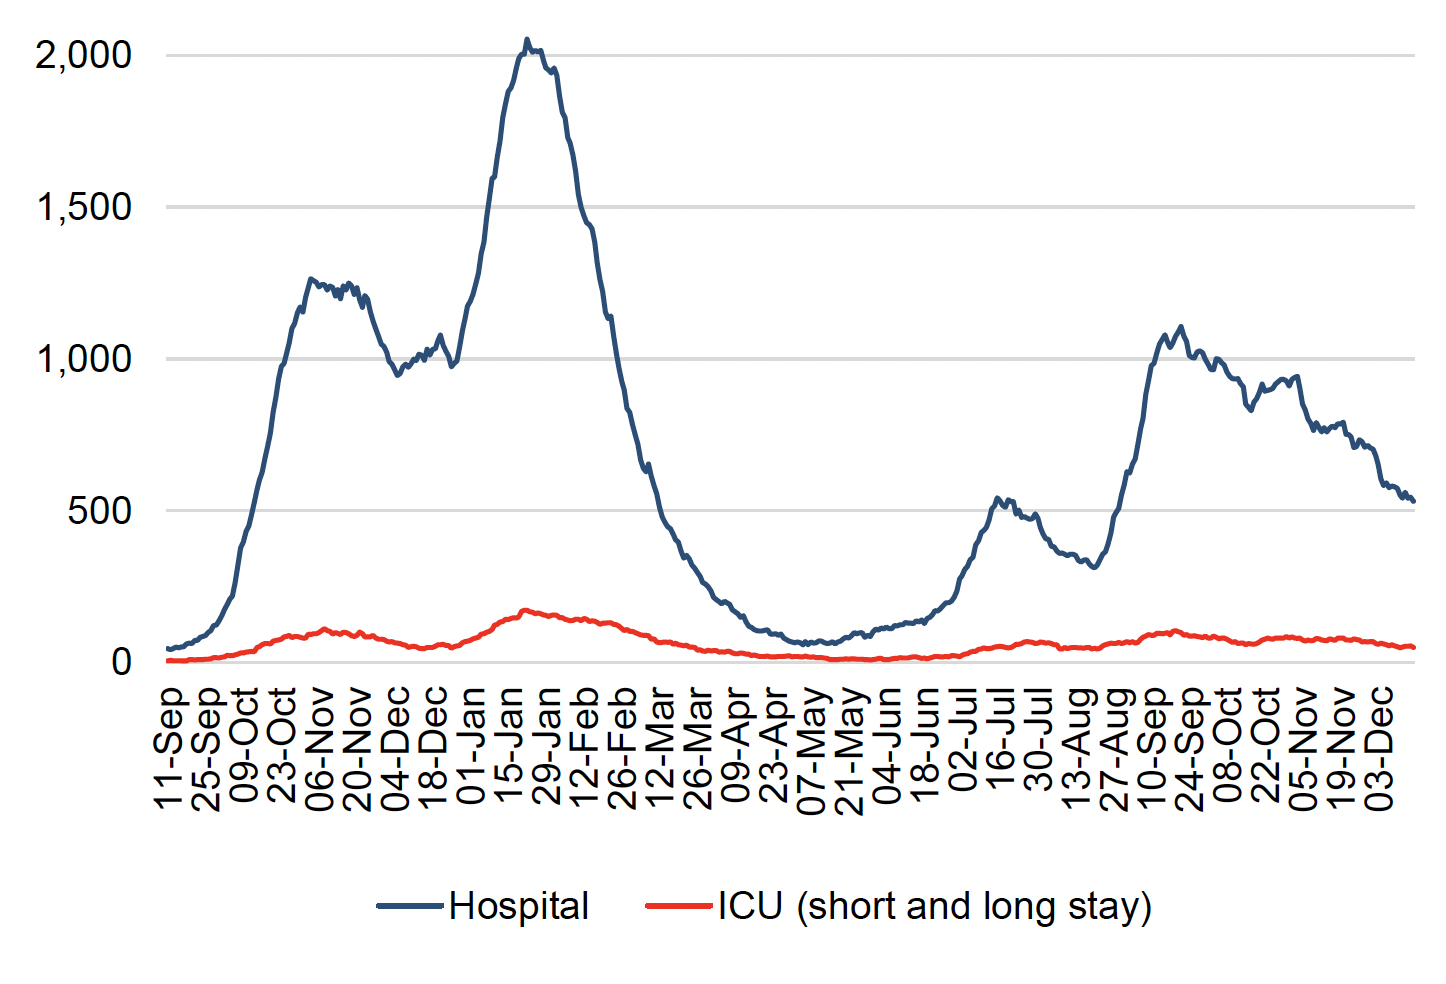 This line chart shows the daily number of patients in hospital and ICU (or combined ICU/ HDU) across Scotland with recently confirmed Covid-19 with a length of stay of 28 days or less since 11 September 2020. Covid-19 patients in hospital (including those in ICU) increased sharply from the end-September 2020 reaching a peak at the beginning of November. Patients in hospital then stabilised before a decrease at the beginning of December. It then started rising sharply from the end of December, reaching a peak of over 2,000 on 22 January 2021. The number of patients in hospital decreased sharply since then before plateauing throughout May and June. It then rose to over 500 patients in hospital in July and decreased by the end of August. It then rose again reaching a peak of over a 1,000 patients in hospital by mid-September 2021. While the number of patients in hospital has been fluctuating since then, it has been generally declining since early October.  
A line for patients in ICU for both short and long stay follows a similar pattern with an increase seen for short stay patients from end-September 2020. It then reached a peak of over 100 patients in ICU with length of stay 28 days or less at the beginning of November and then decreased to just below 50 patients in ICU in December 2020. Then a sharper increase is seen in patients in ICU for short and long stay by the end of January 2021 before it started to decrease. The number of patients in ICU remained low throughout late spring and early summer before a slight increase in July 2021. It then decreased a little before a further increase by mid-September. Covid-19 ICU occupancy has fluctuated and has decreased slightly overall since then. 
